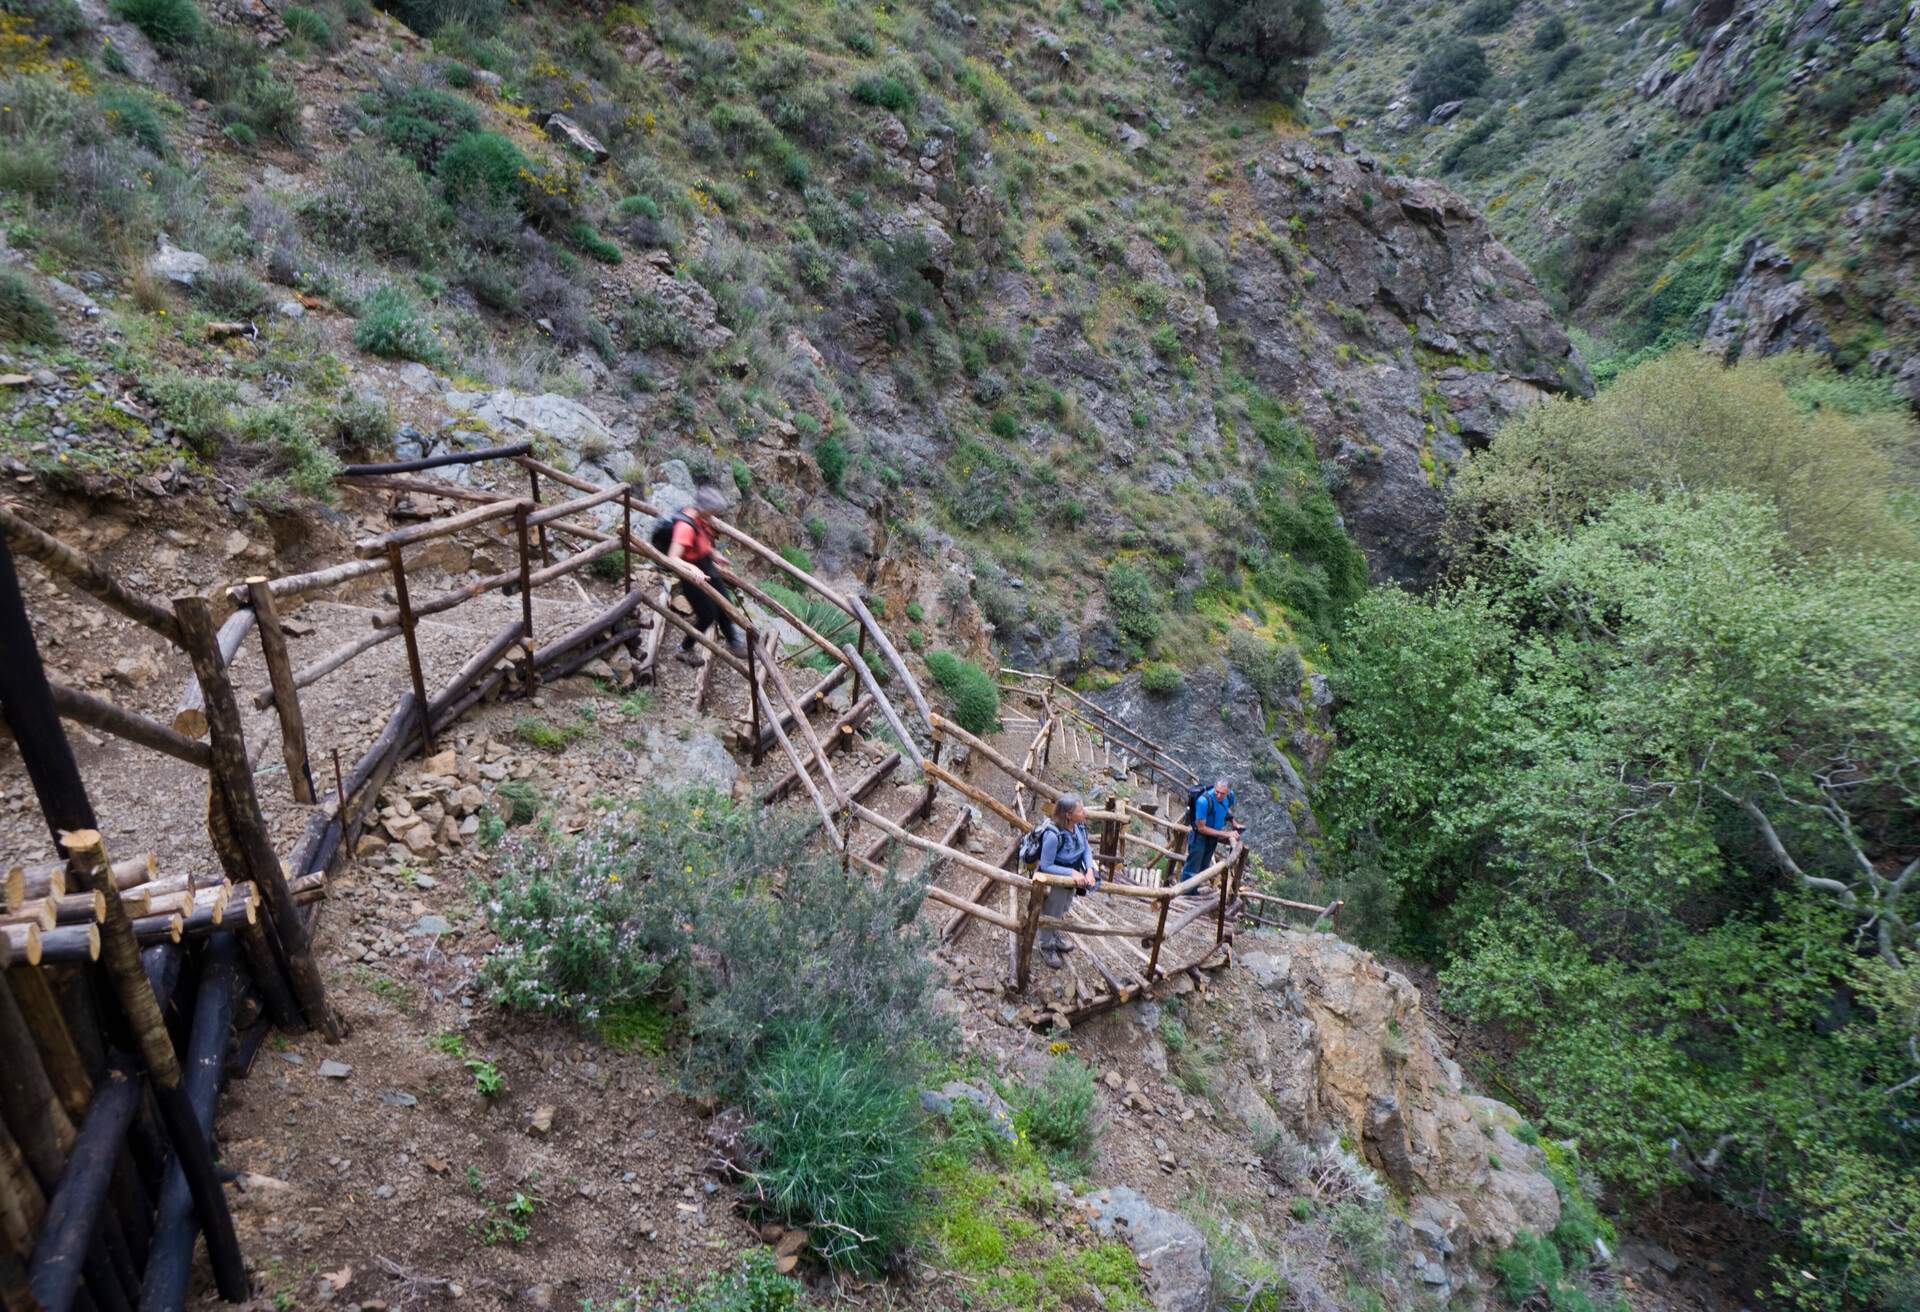 Crete. Greece. Europe. Visitors on wooden stairs constructed down steep slope in Richtis Gorge (Rihtis, Rihti, Rixti) near town of Exo Mouliana. Lasithi Region. MR